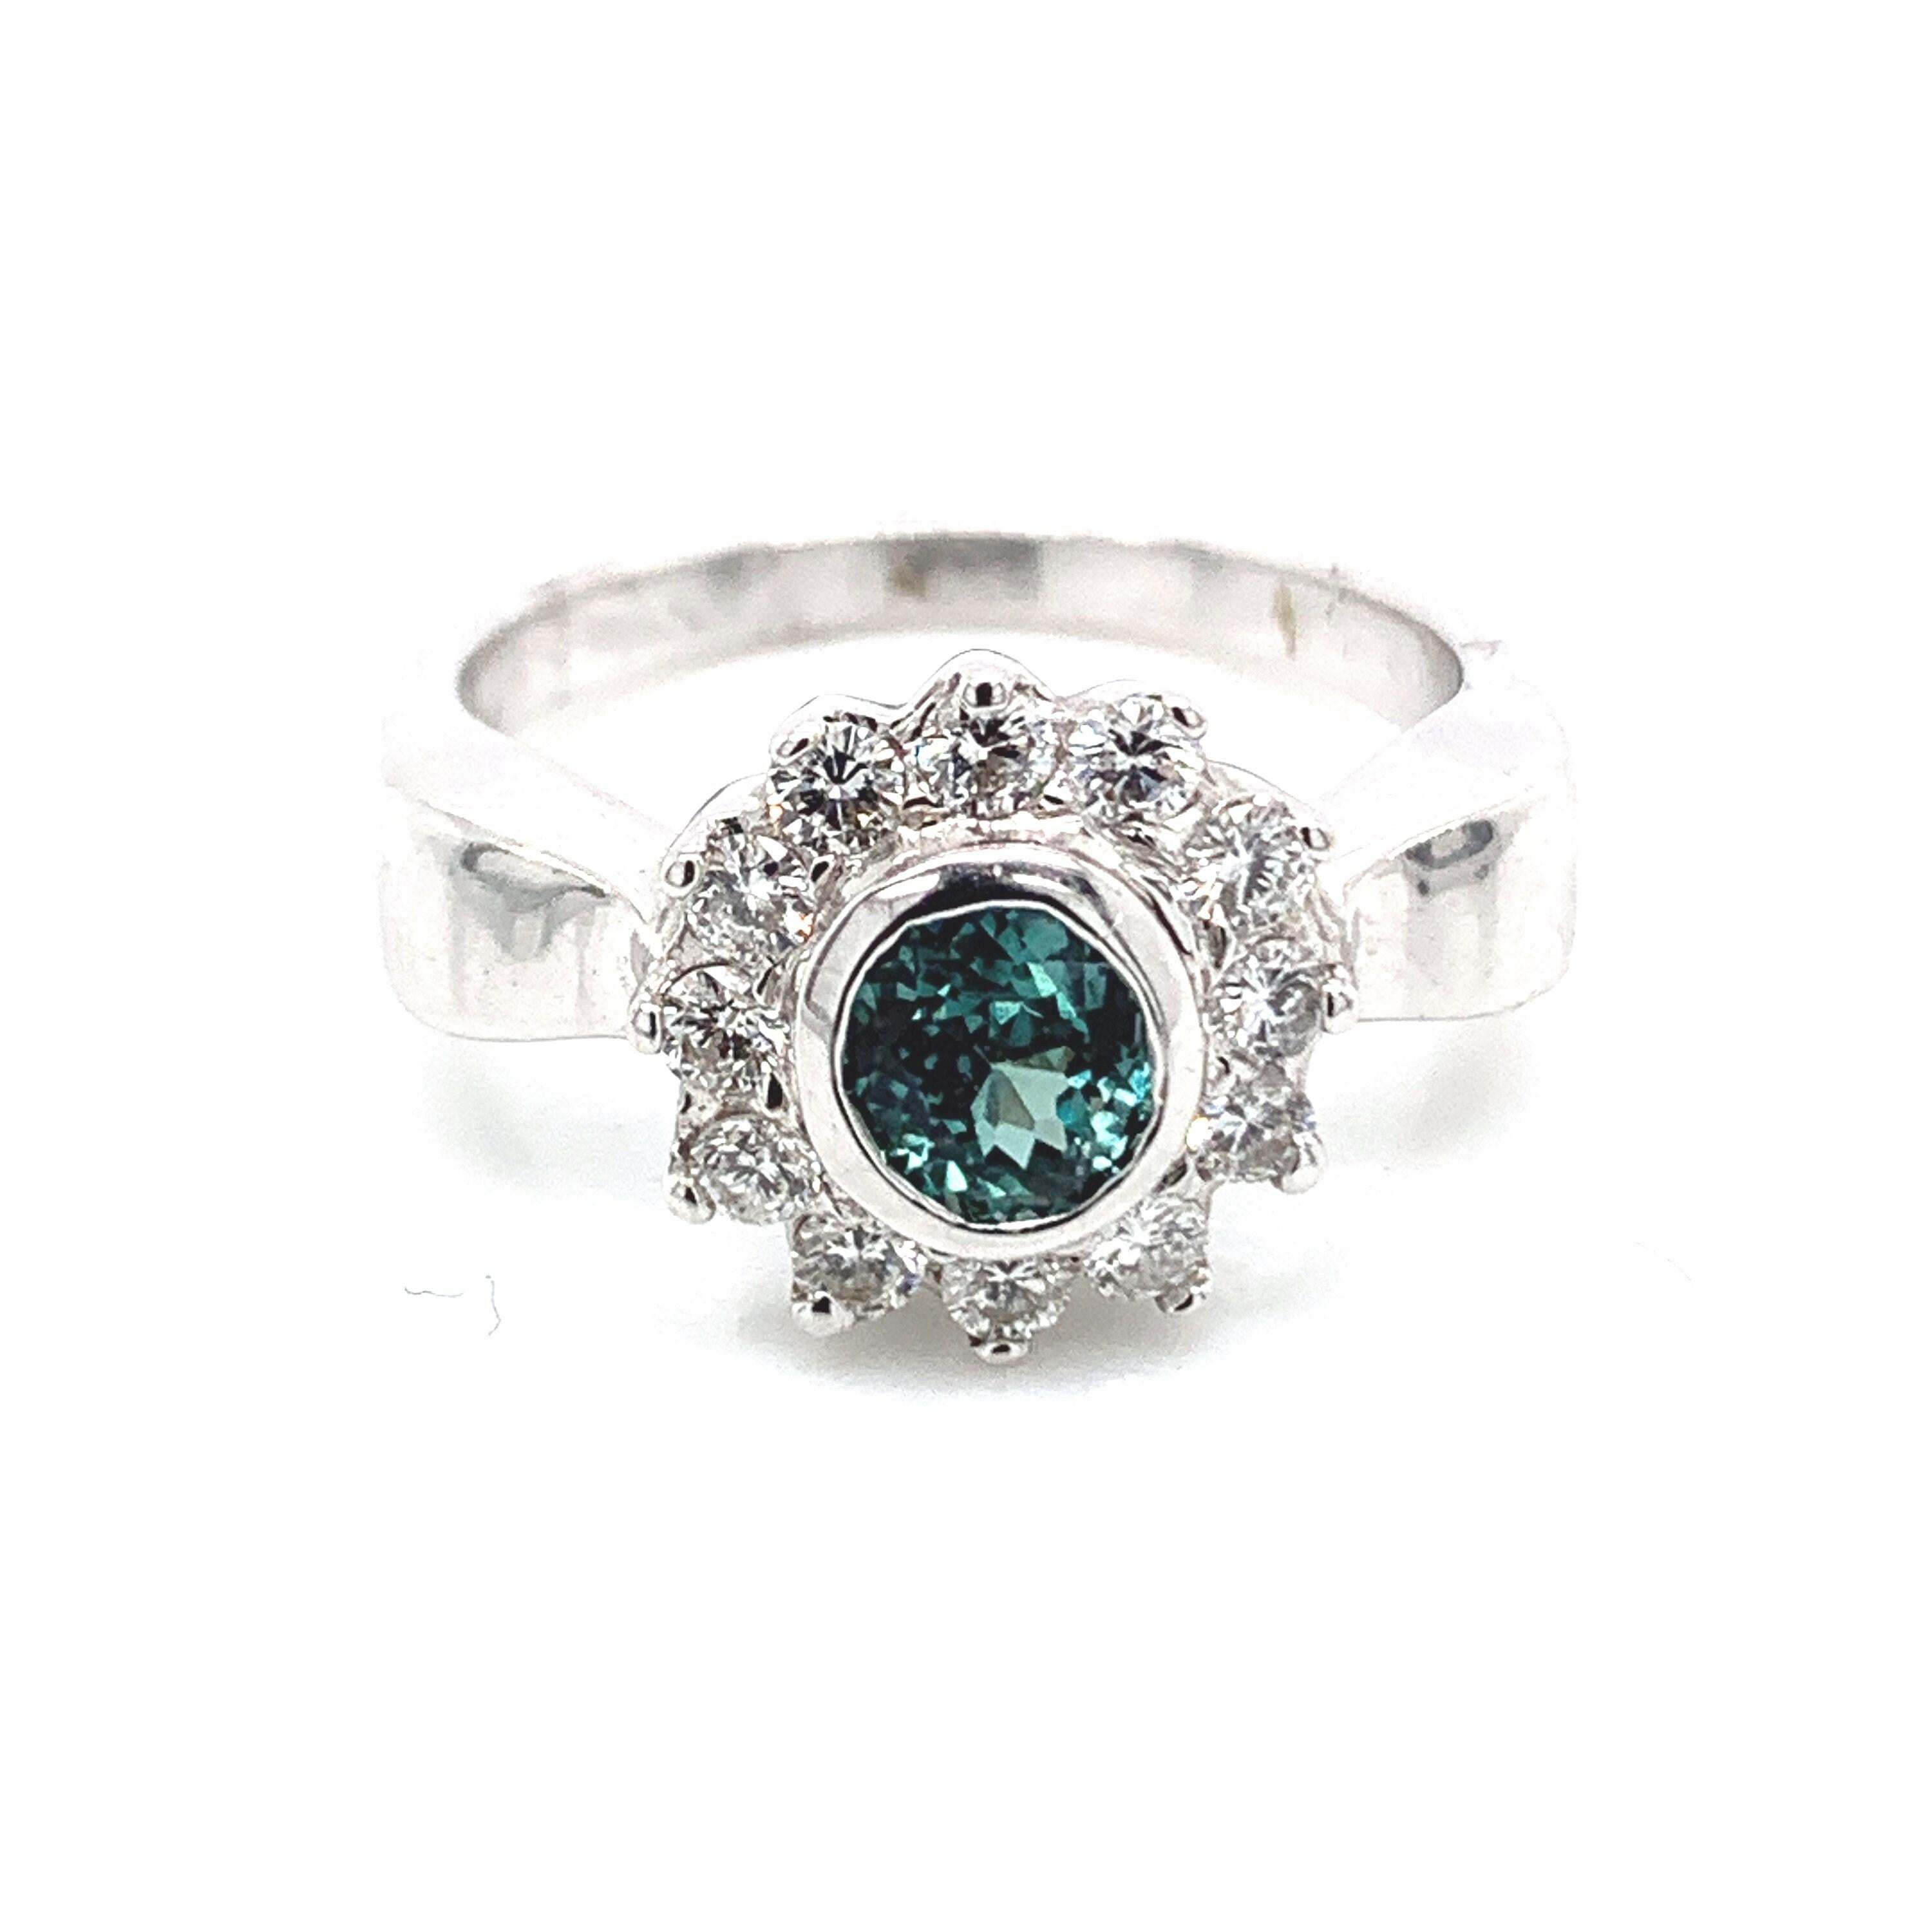 This is a gorgeous natural AAA quality round Alexandrite surrounded by dainty diamonds that are set in a vintage platinum setting. This ring features a natural 1.01 round alexandrite surrounded by a halo of trillion cut white diamonds. The ring is a